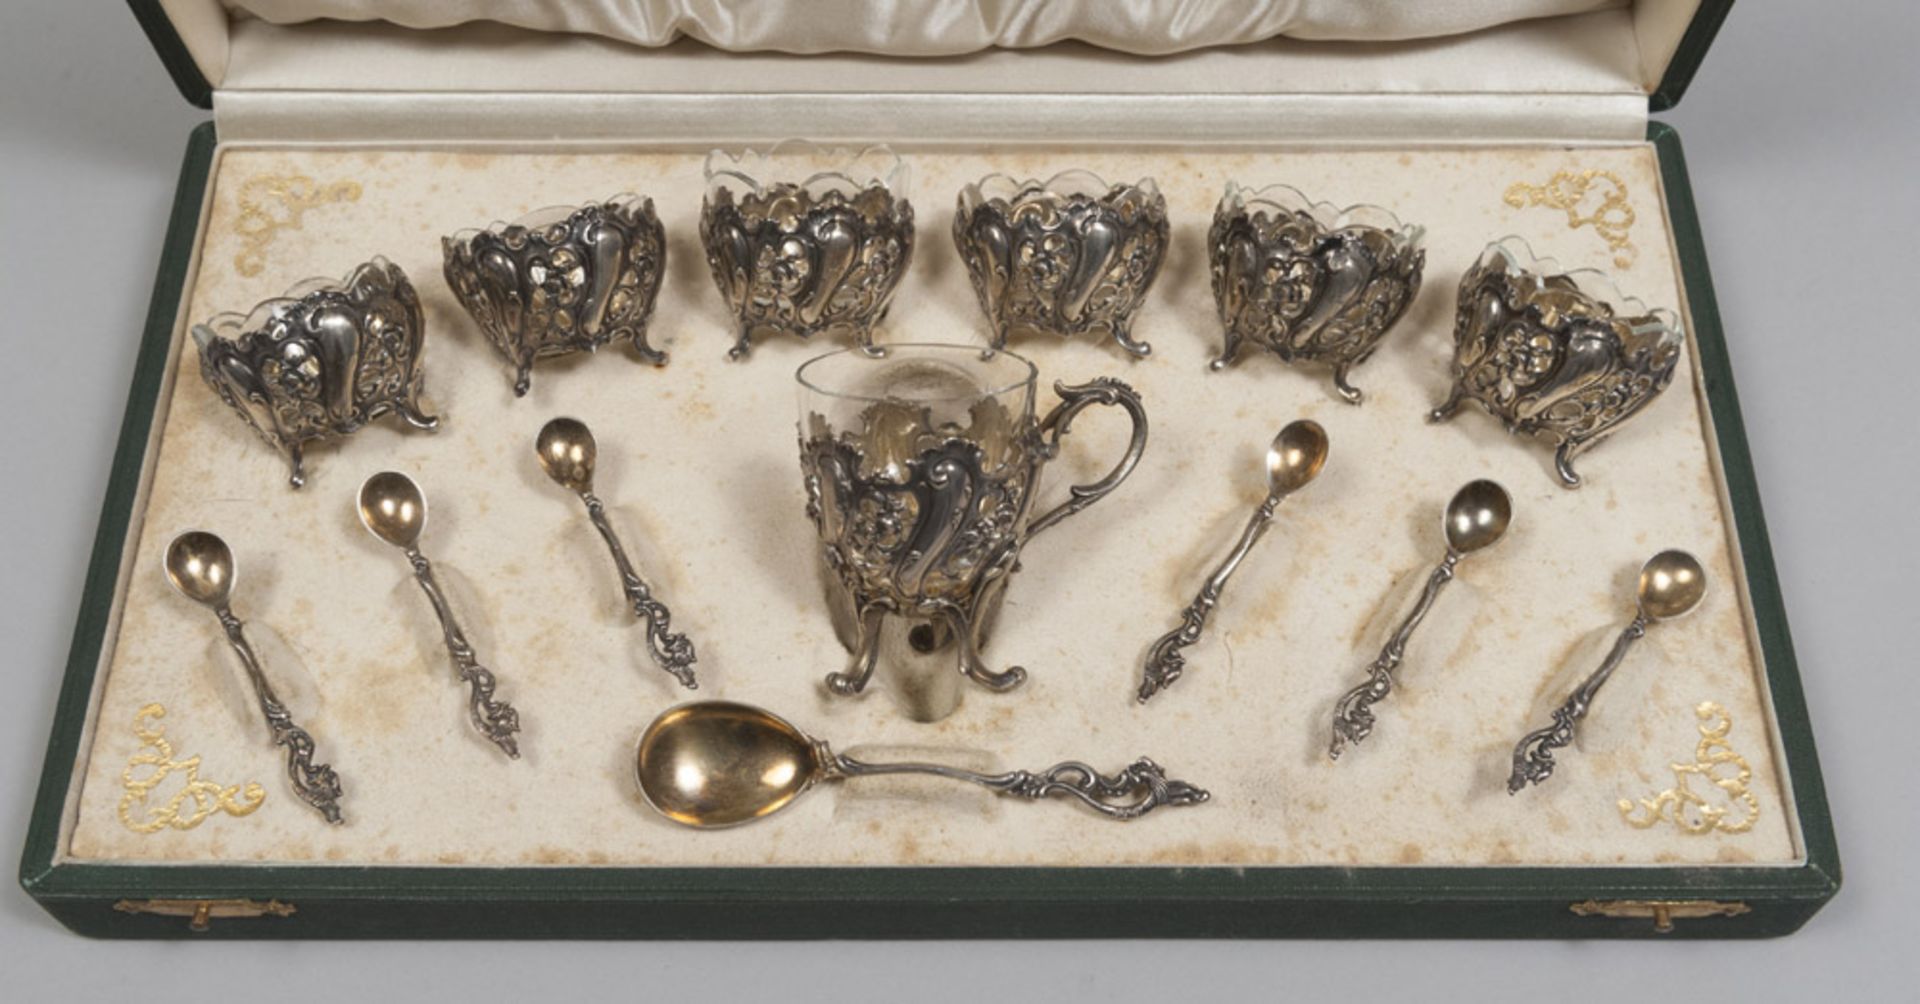 Table service in silver, Punch Germany 19th century. Title 800/1000. Measures casket cm. 7 x 32 x - Bild 2 aus 2